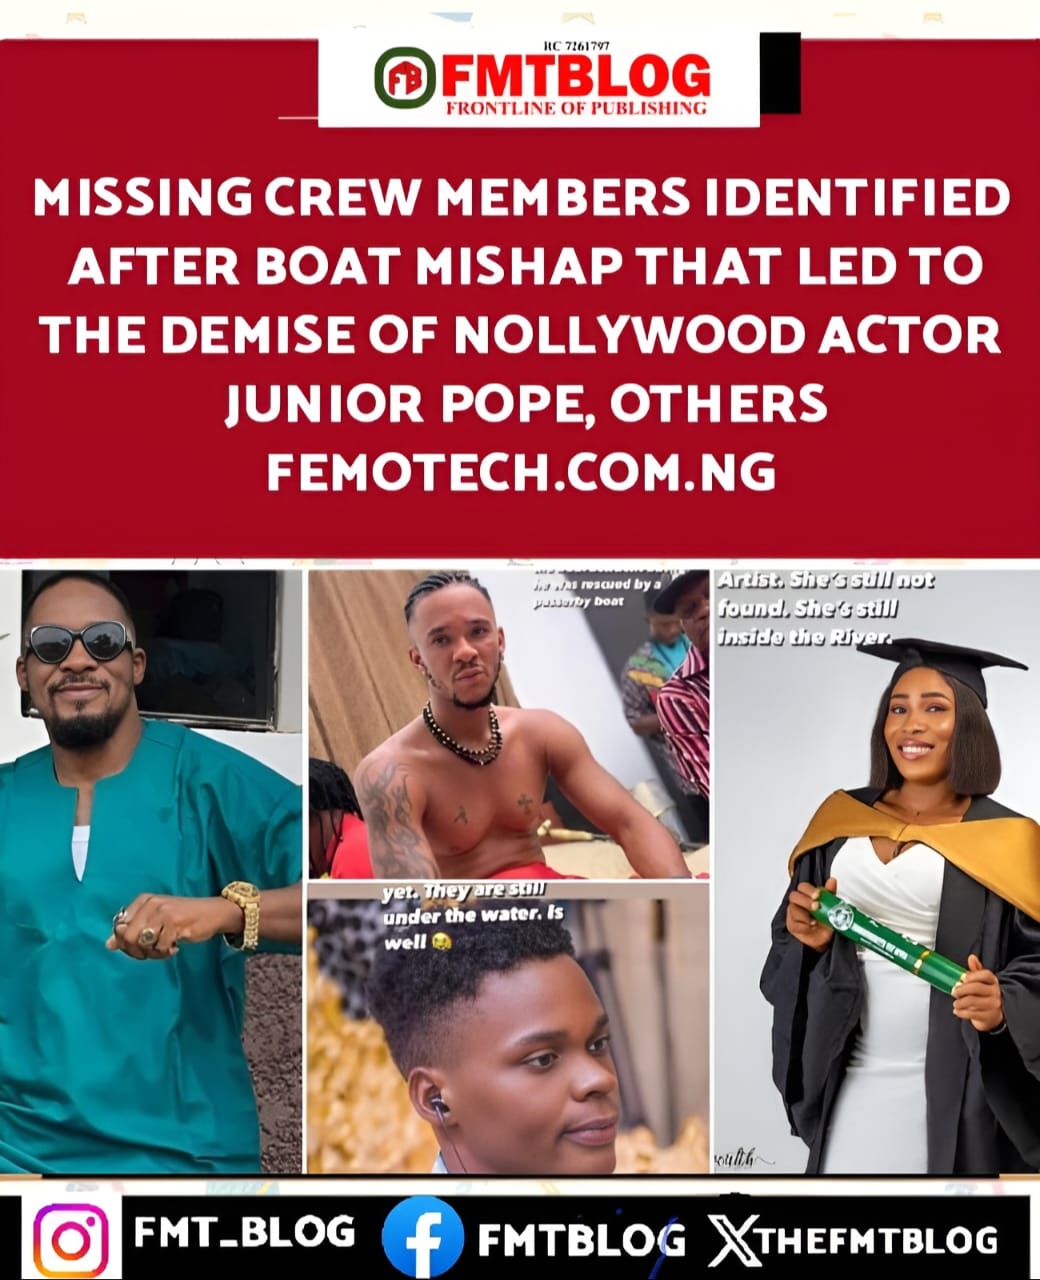 Missing Crew Members Identified After Boat Mishap That Led To The Demise Of Nollywood Actor Junior Pope, Others (PHOTOS)